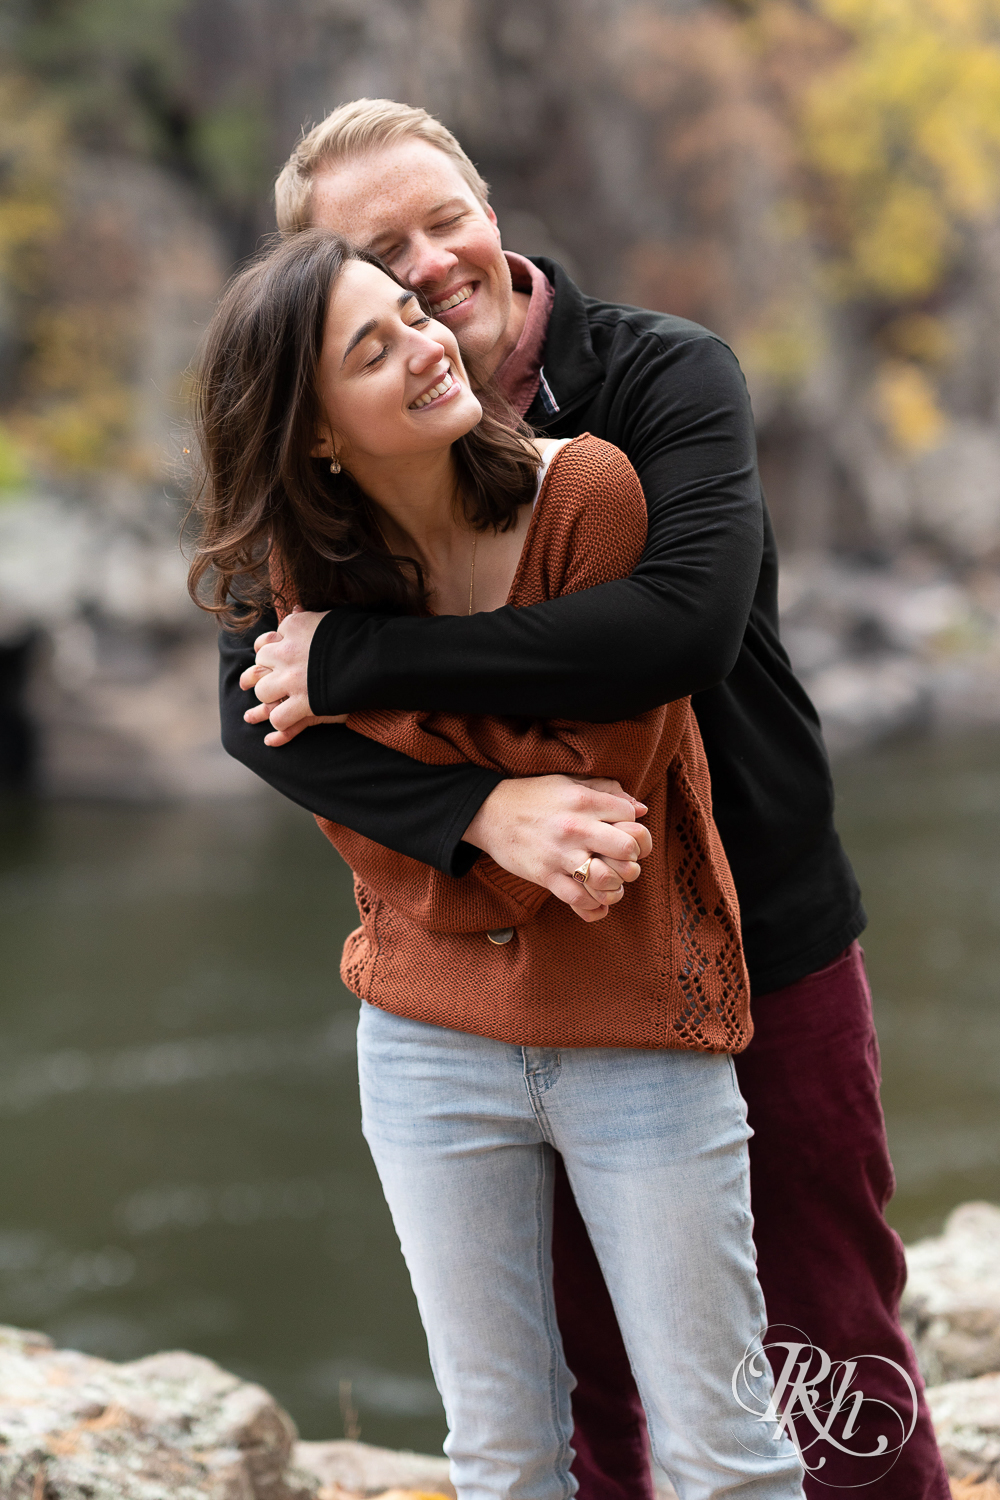 Annalyse and Brent snuggling at their sunrise engagement session in Taylors Falls, Minnesota.